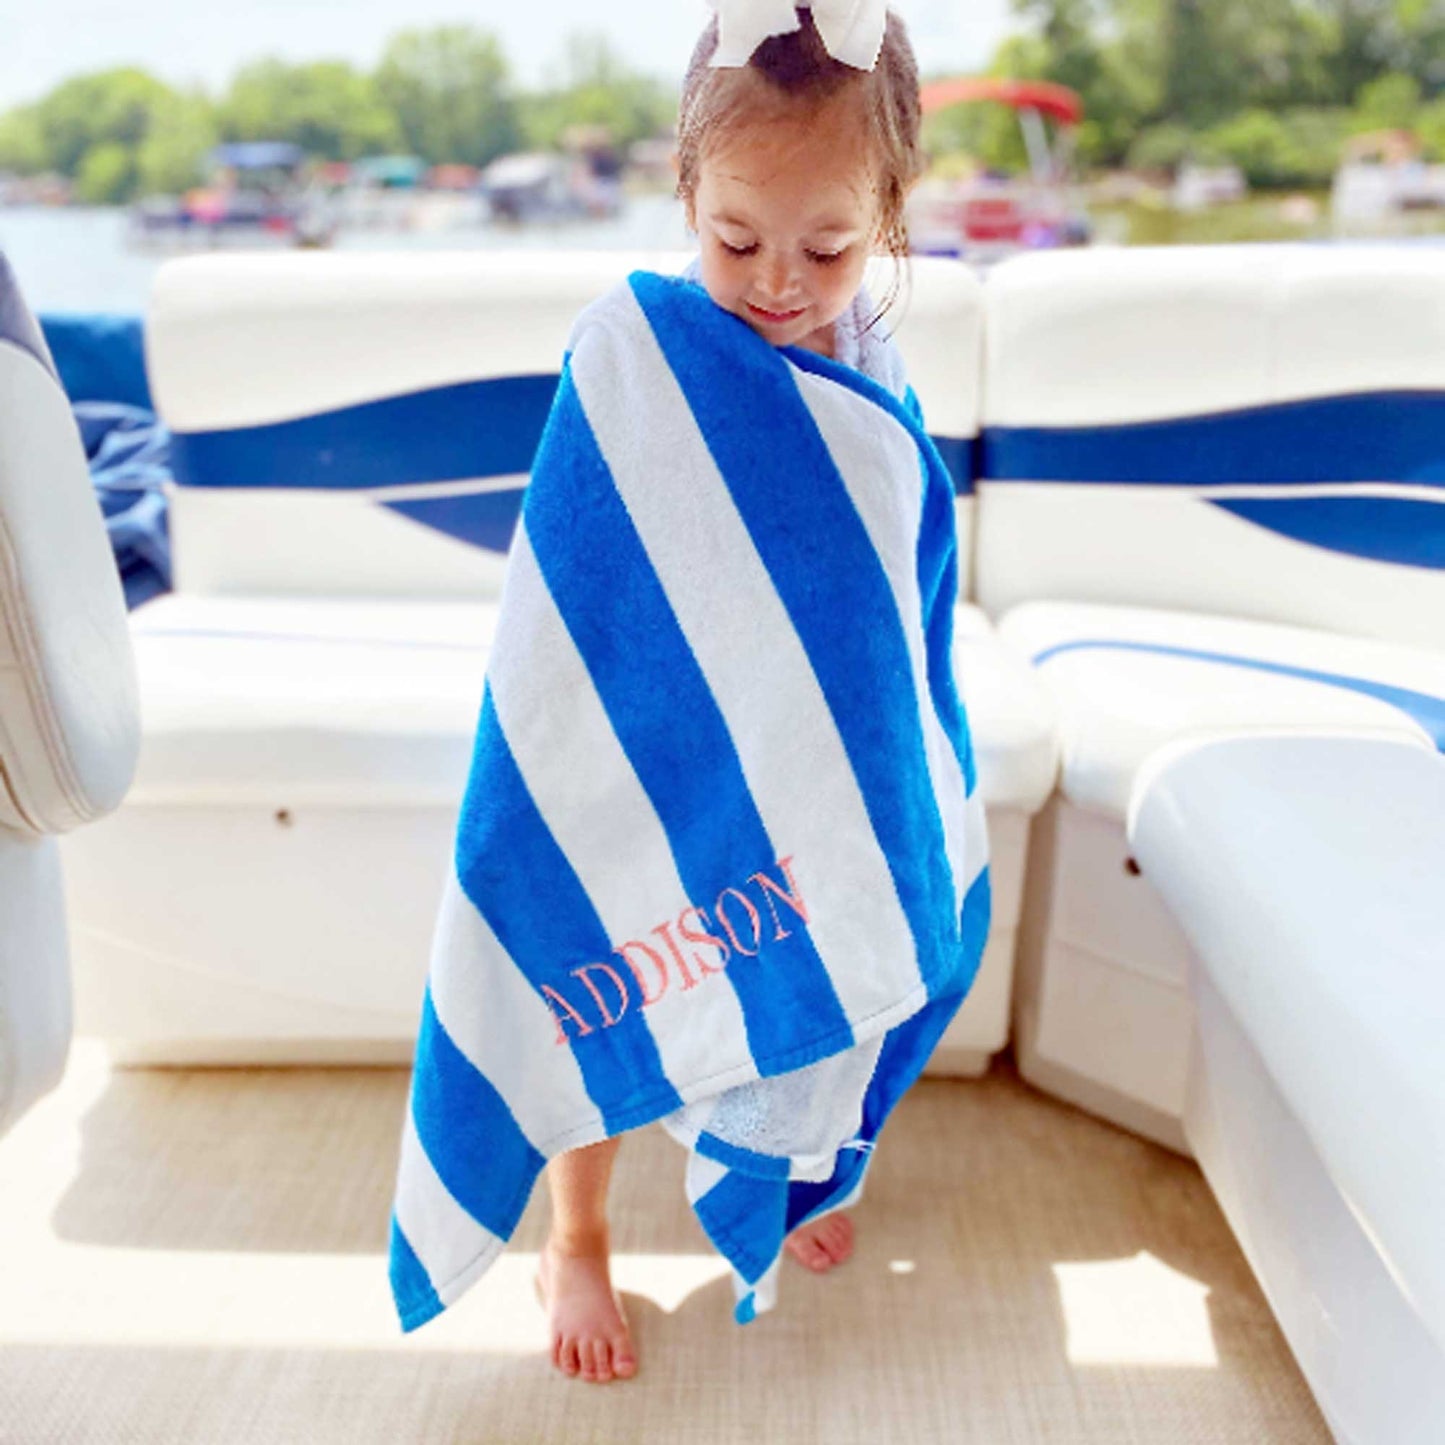 Little girl on a boat wrapped in a personalized striped beach towel